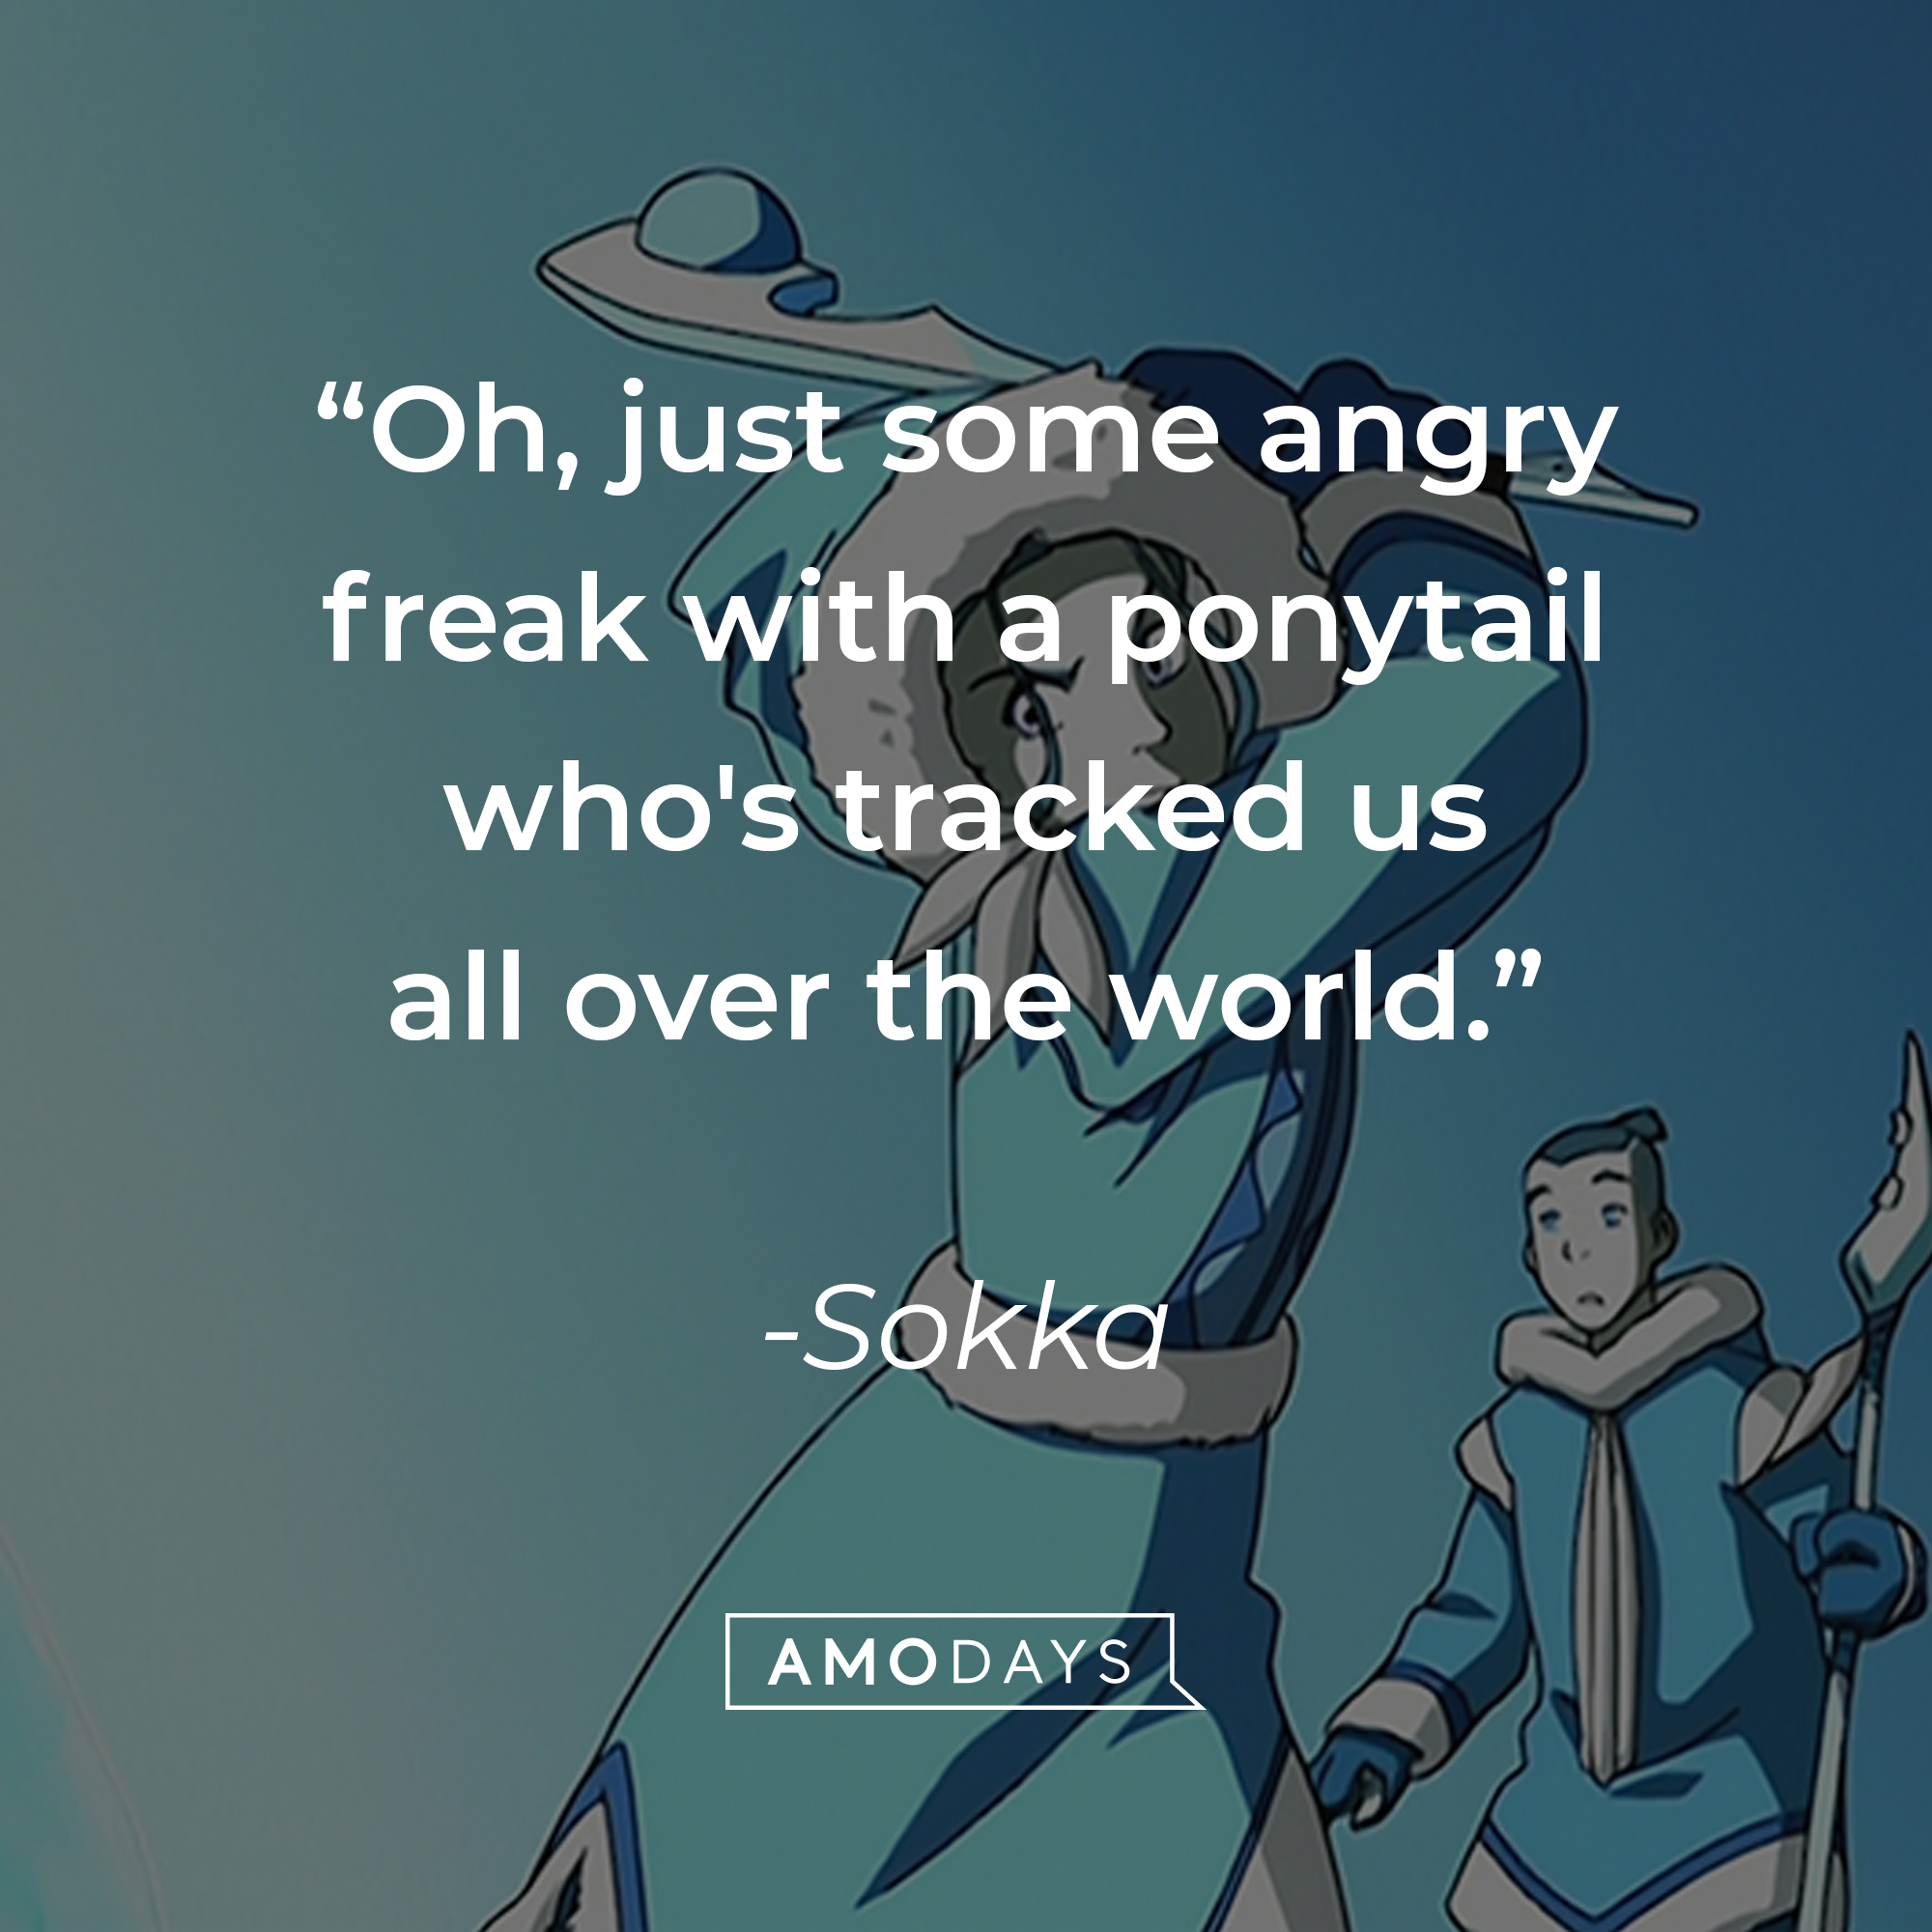 Sokka's quote: "Oh, just some angry freak with a ponytail who's tracked us all over the world." | Source: facebook.com/avatarthelastairbender